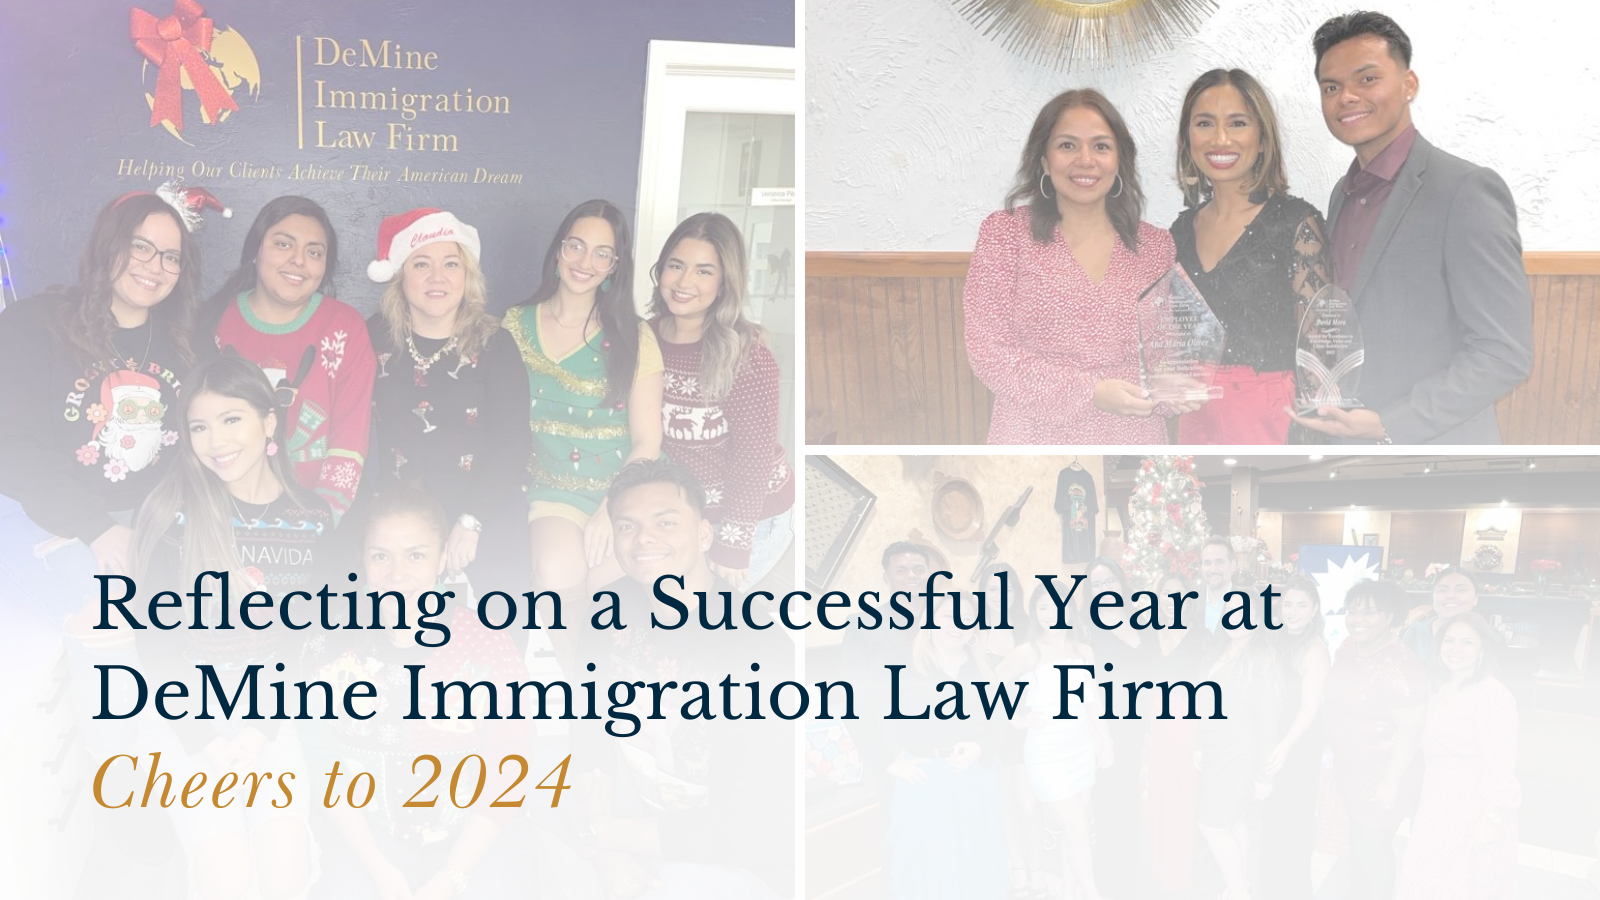  Celebrating Success and Looking Ahead: A Reflection from DeMine Immigration Law Firm